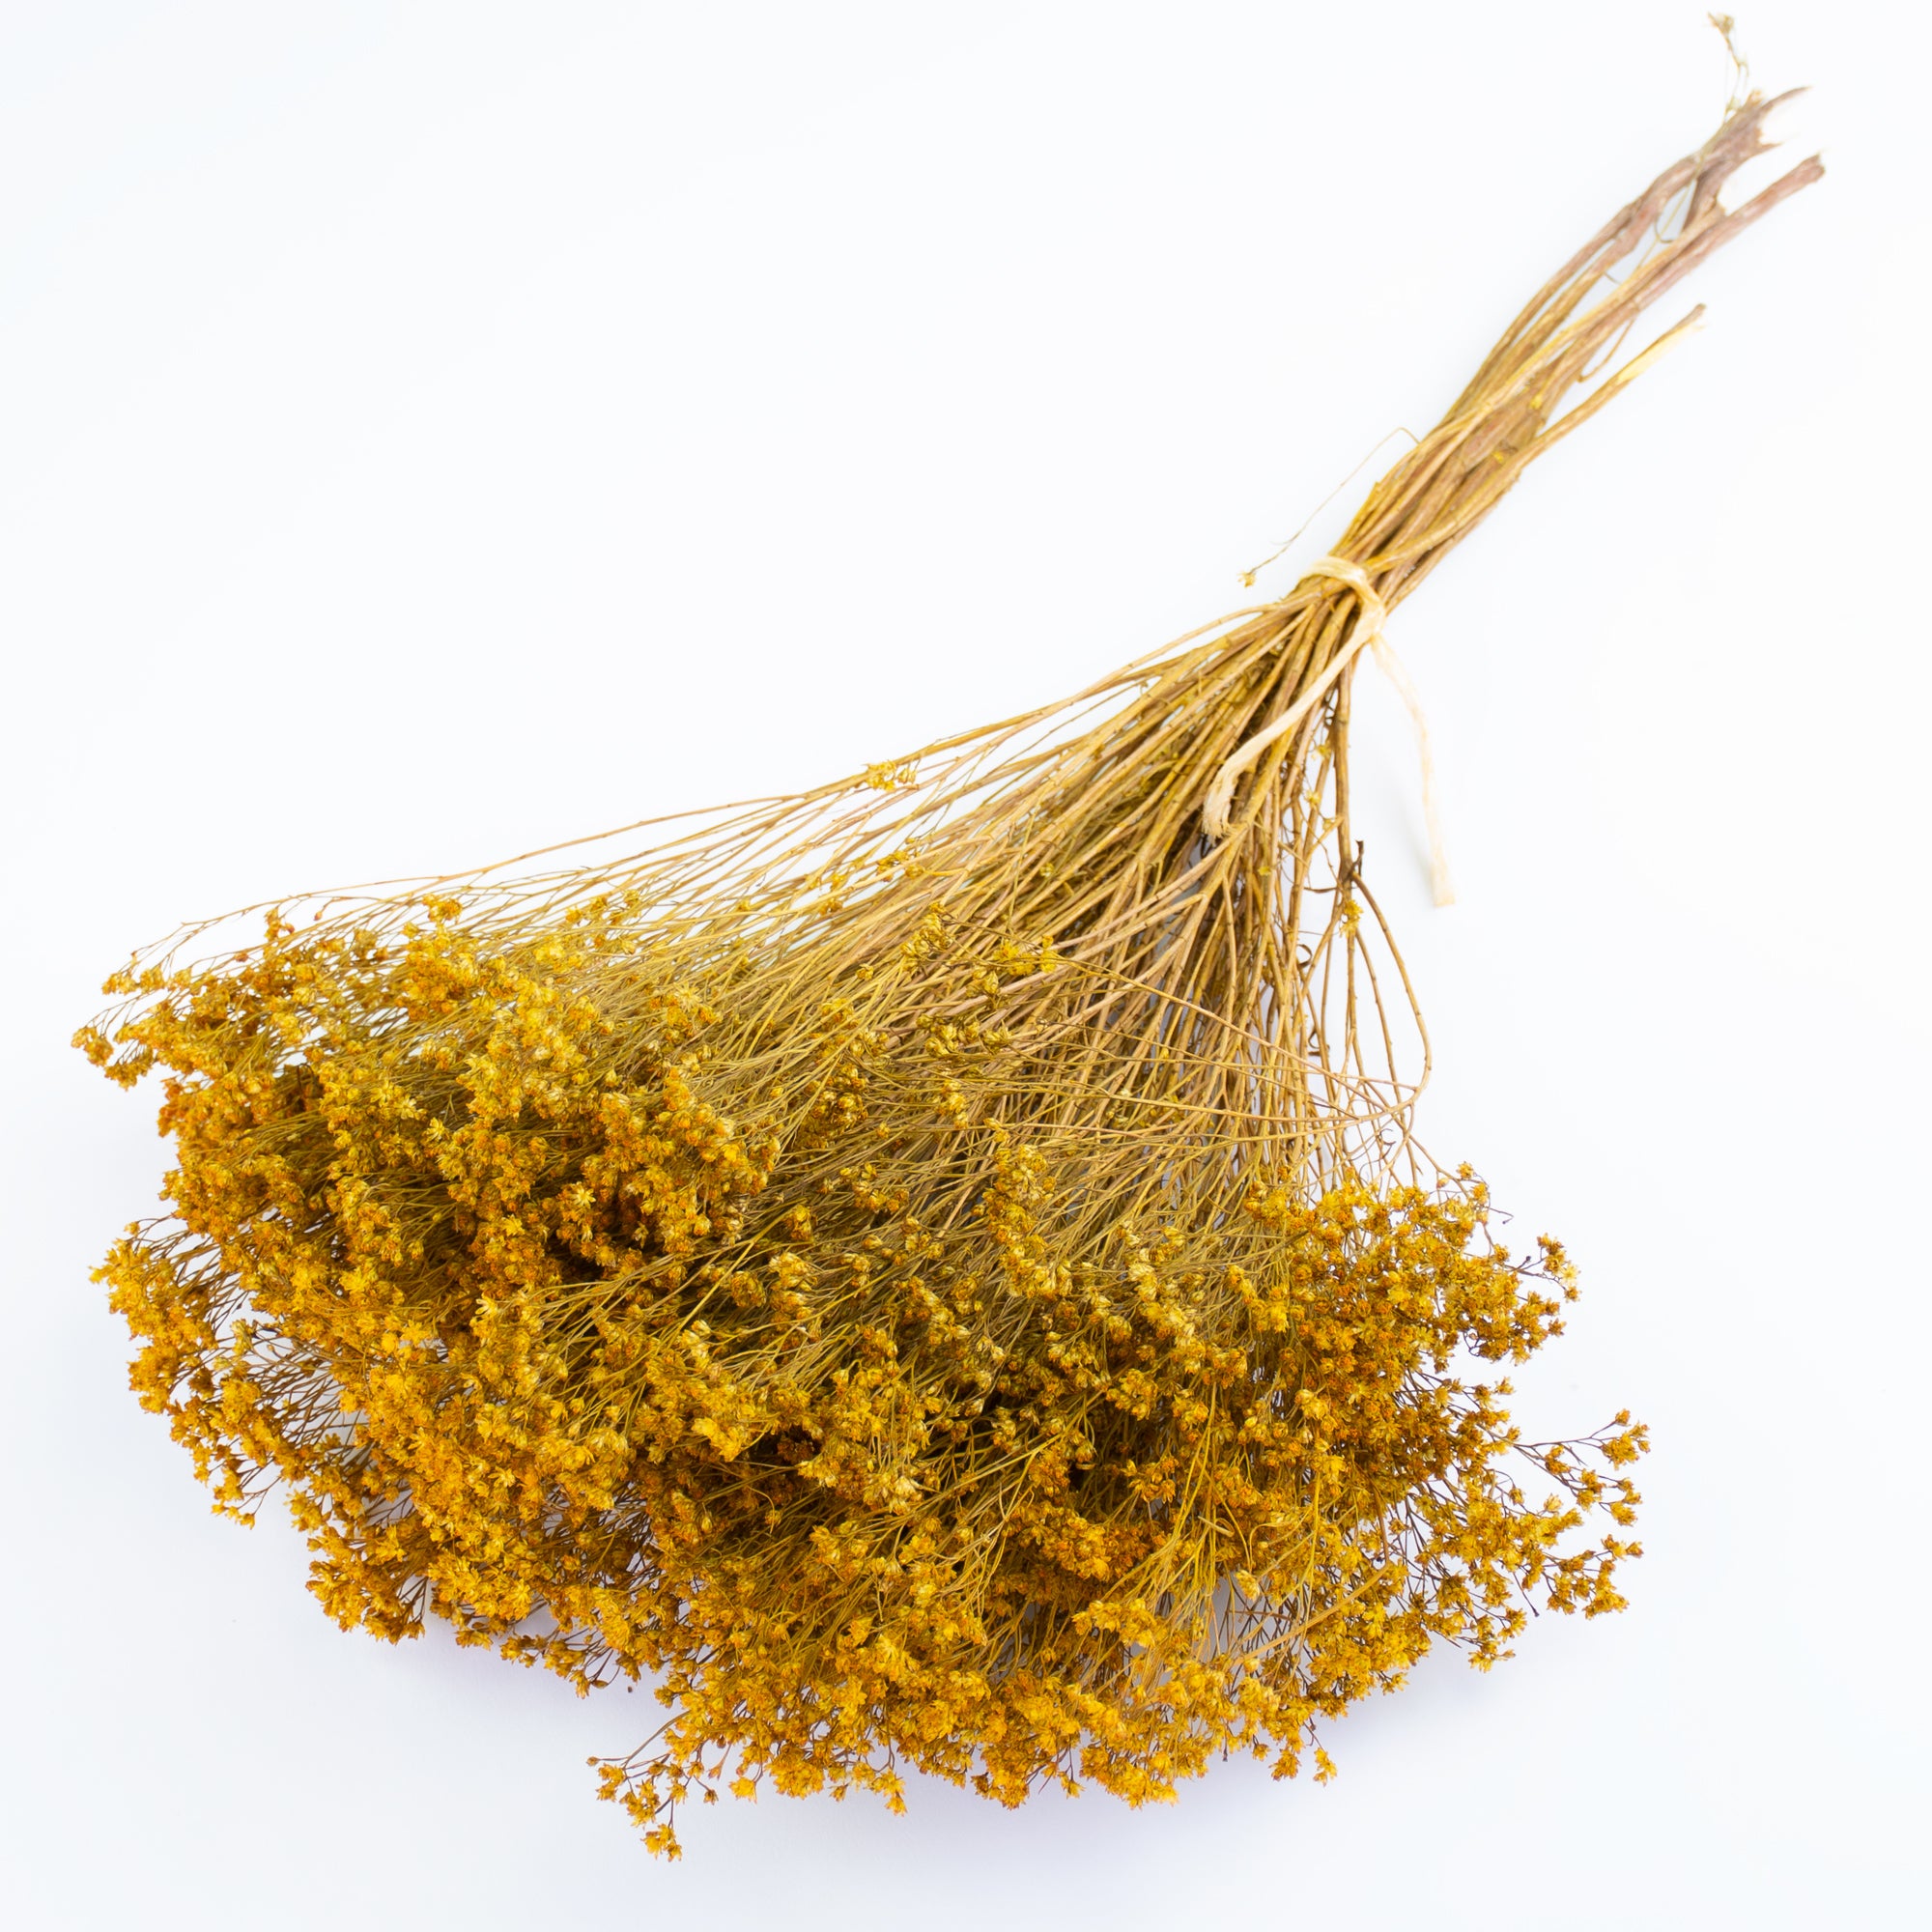 This image shows dried broom bloom in a rich yellow colour, laid on a white background.